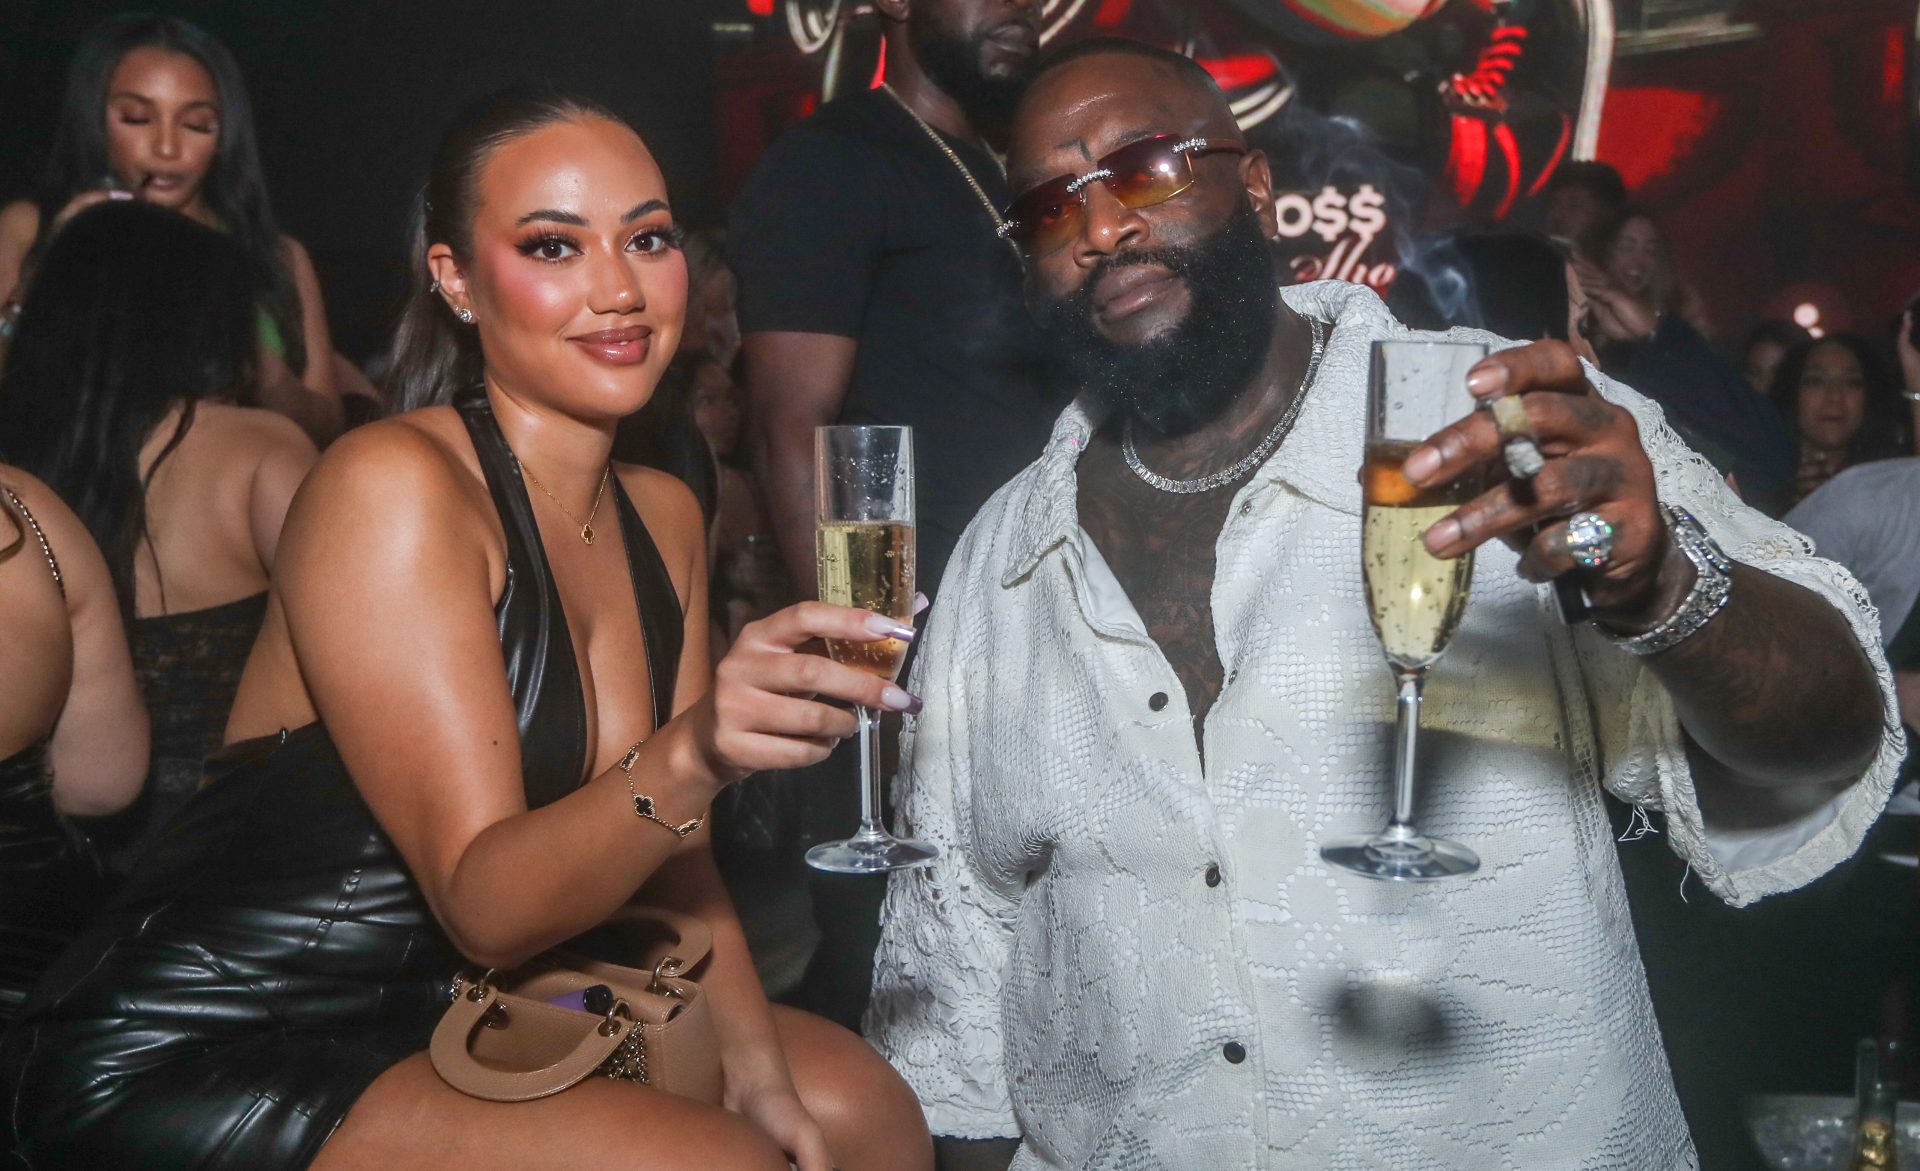 New Boo? Rick Ross’ Name Seemingly Pictured On Woman’s Neck